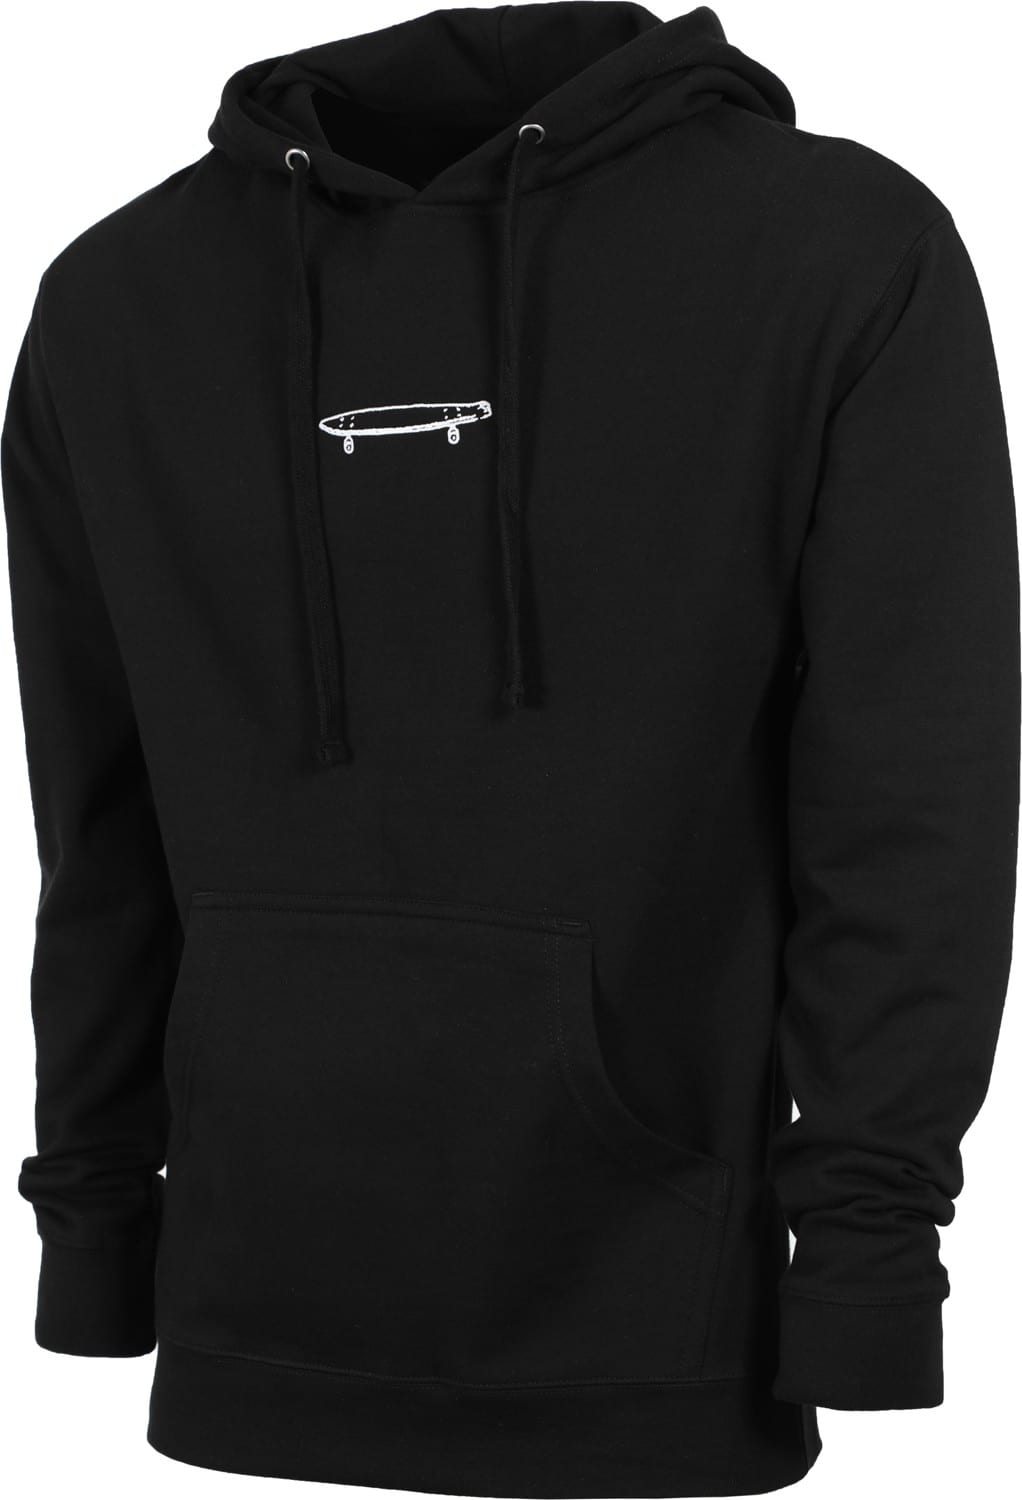 Crailtap Mid Crail Embroidered logo Pullover Hoodie